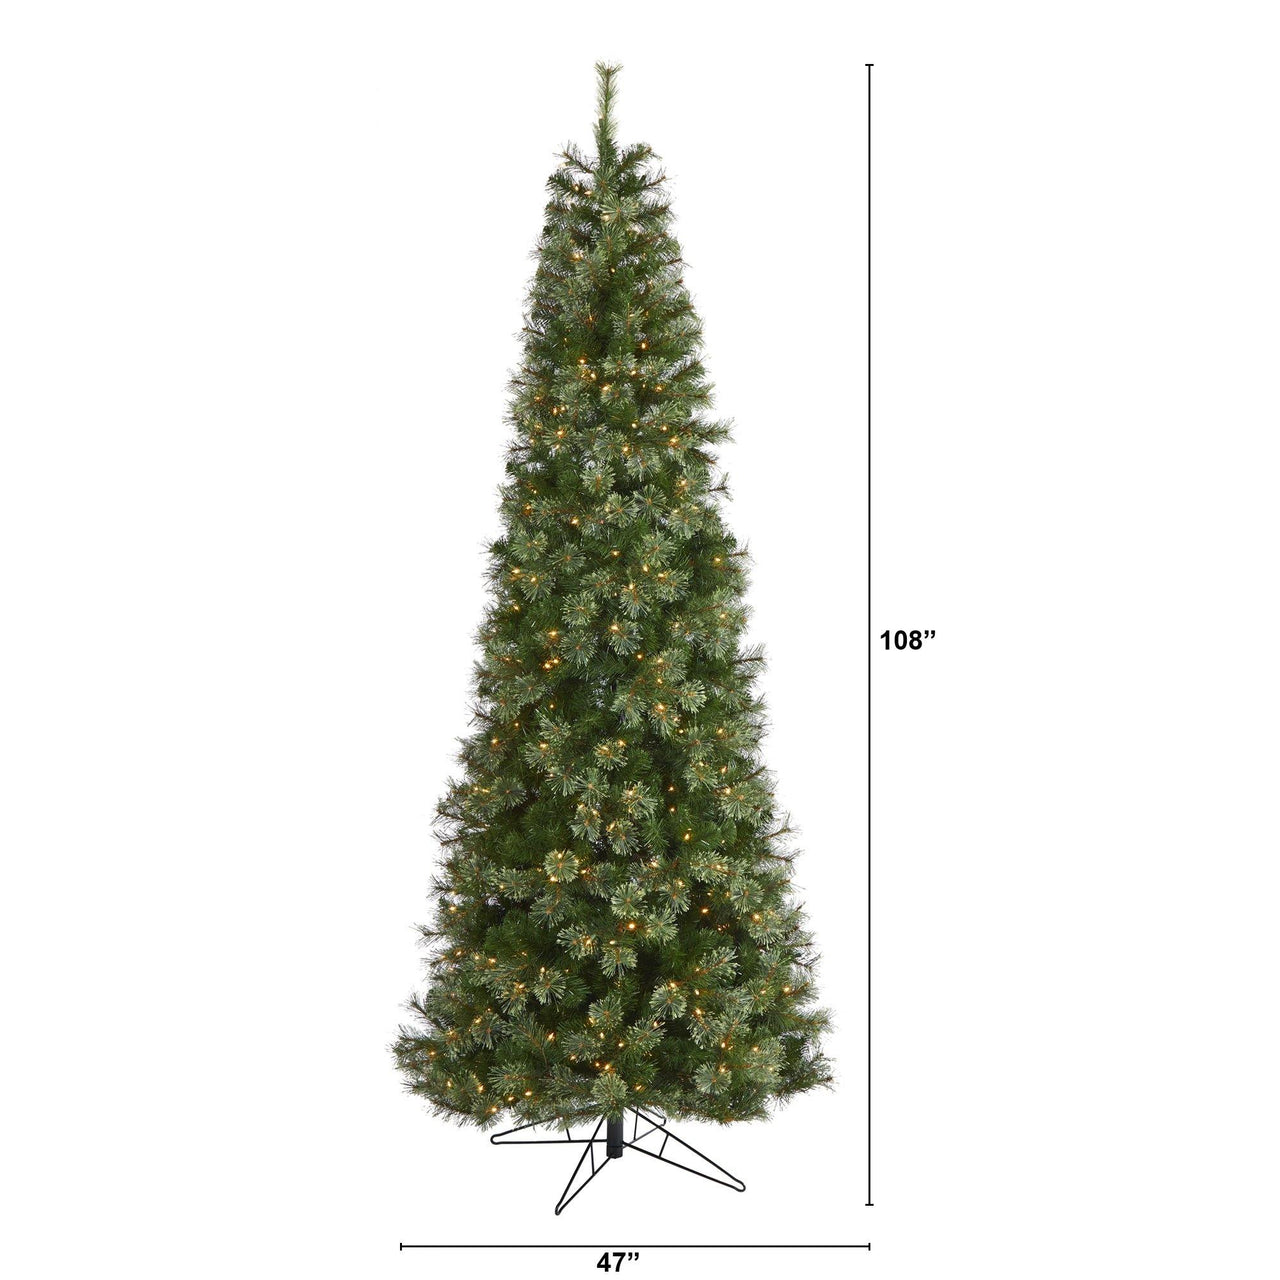 9' Cashmere Slim Artificial Christmas Tree with 550 Warm White Lights and 1308 Bendable Branches - The Fox Decor